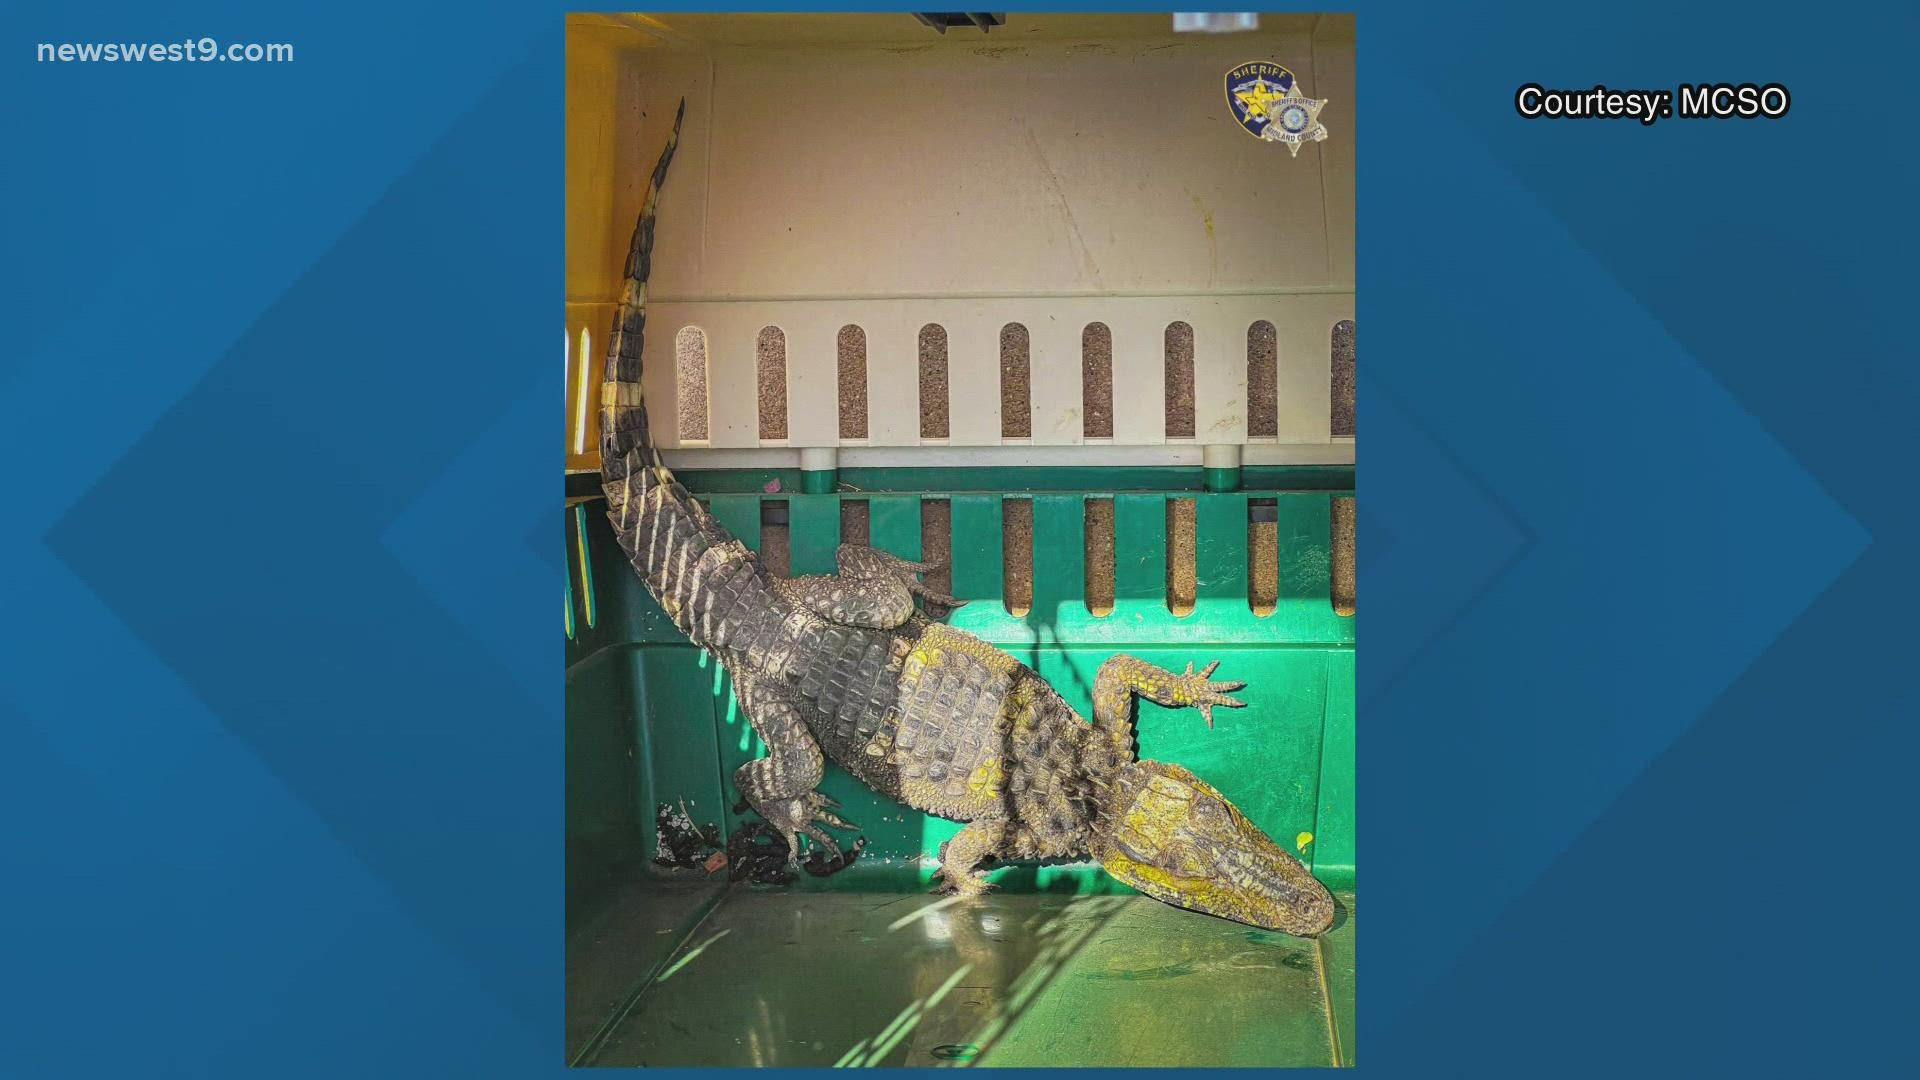 MCSO responded to what was thought to be an alligator loose in Midland County earlier in the week, but it turned out to be an escaped caiman.